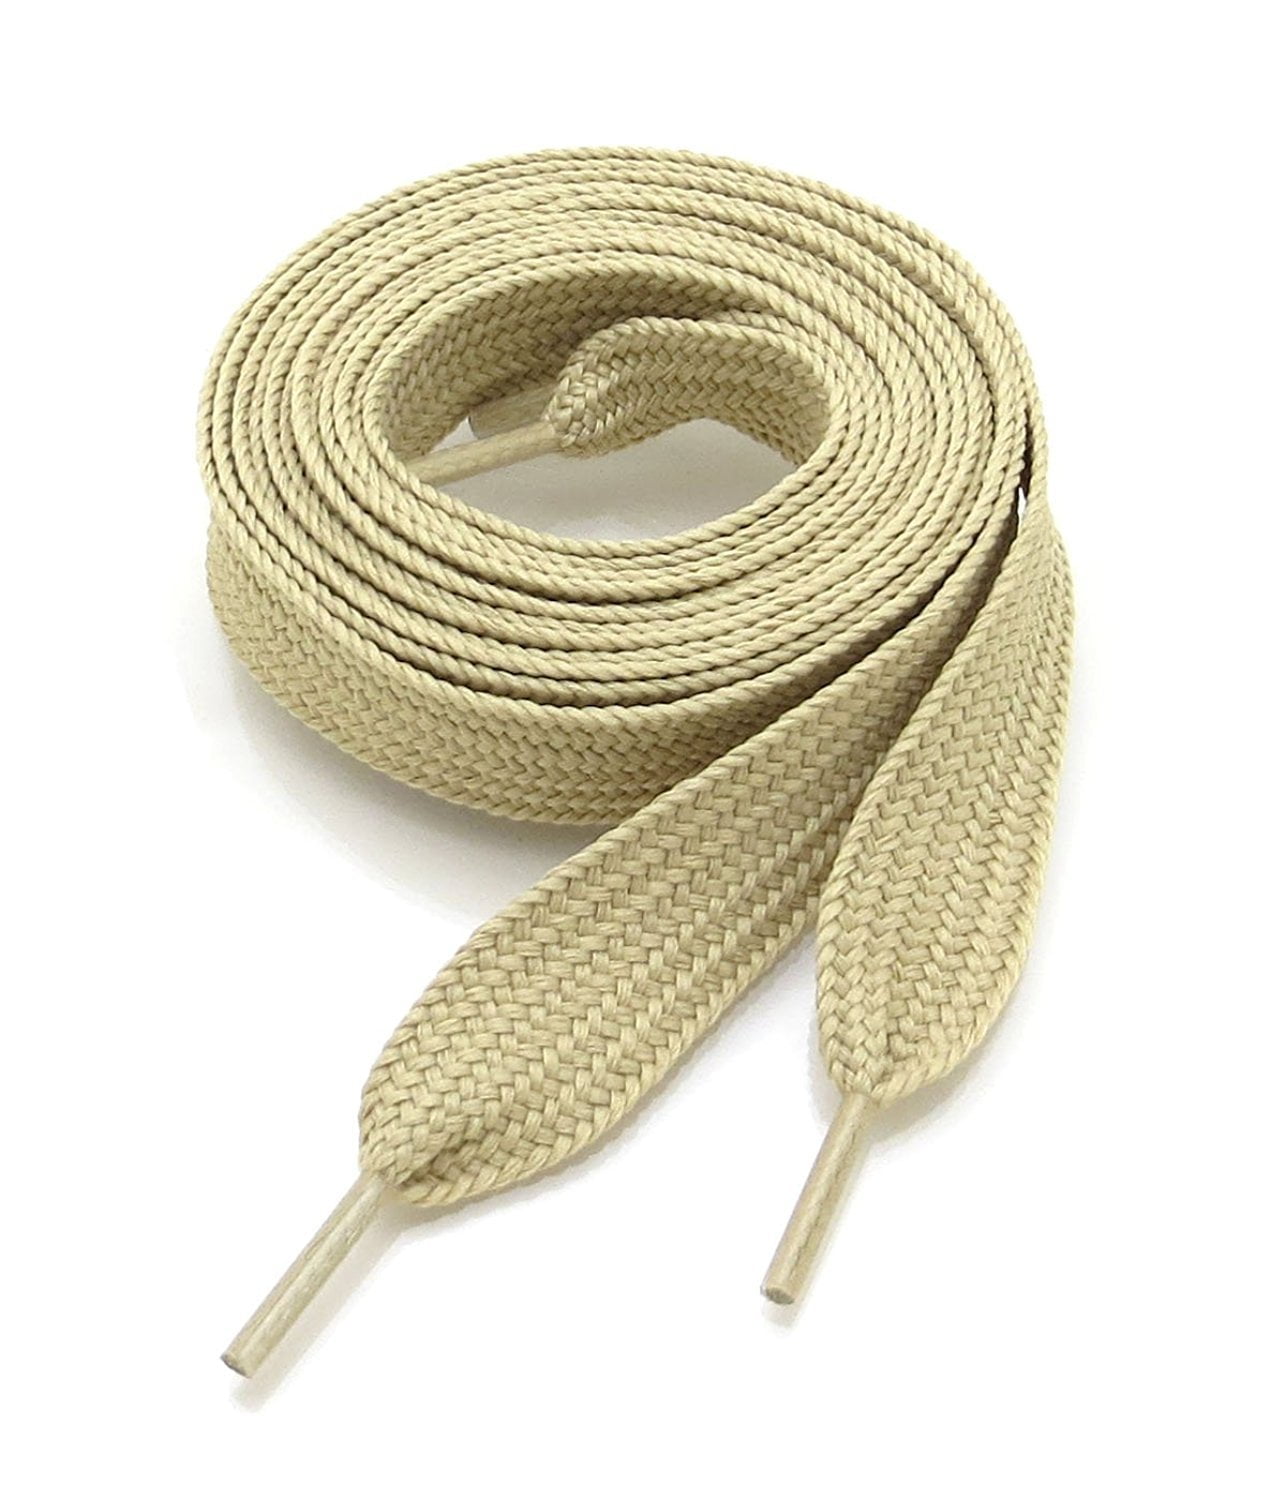 2 Pairs Flat Thick Shoelaces 3/4" Wide 52 inches Shoelaces 35 Colors 